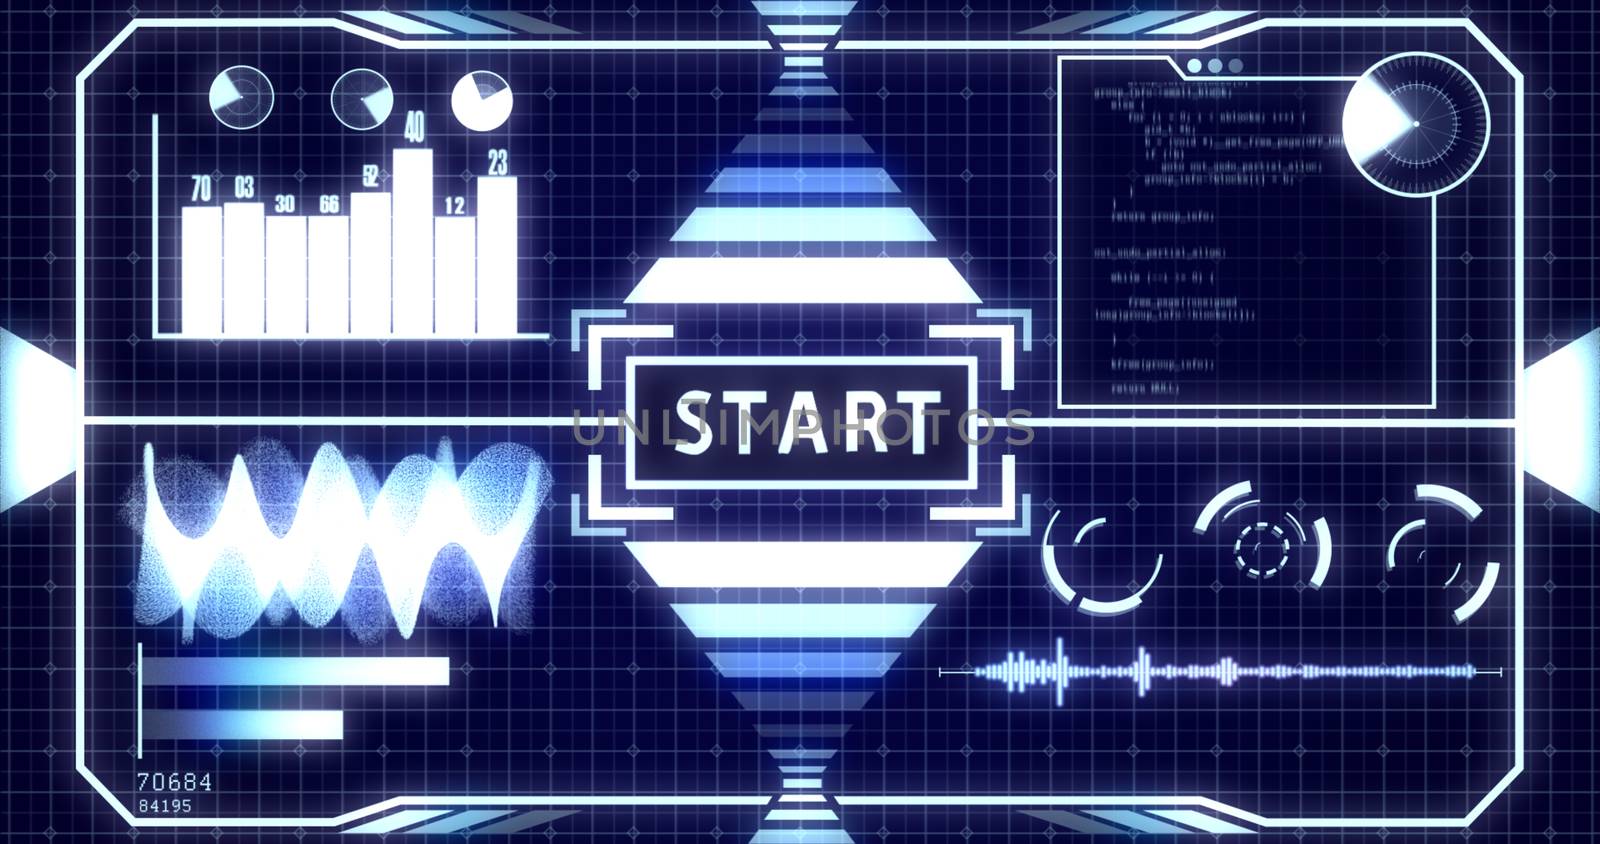 Start Screen on Grid background with Digital objects including Soundwave, Graph, Chart, Circles, Radar, Hacker typing and Glowing light bars Ver.1 (Full screen)